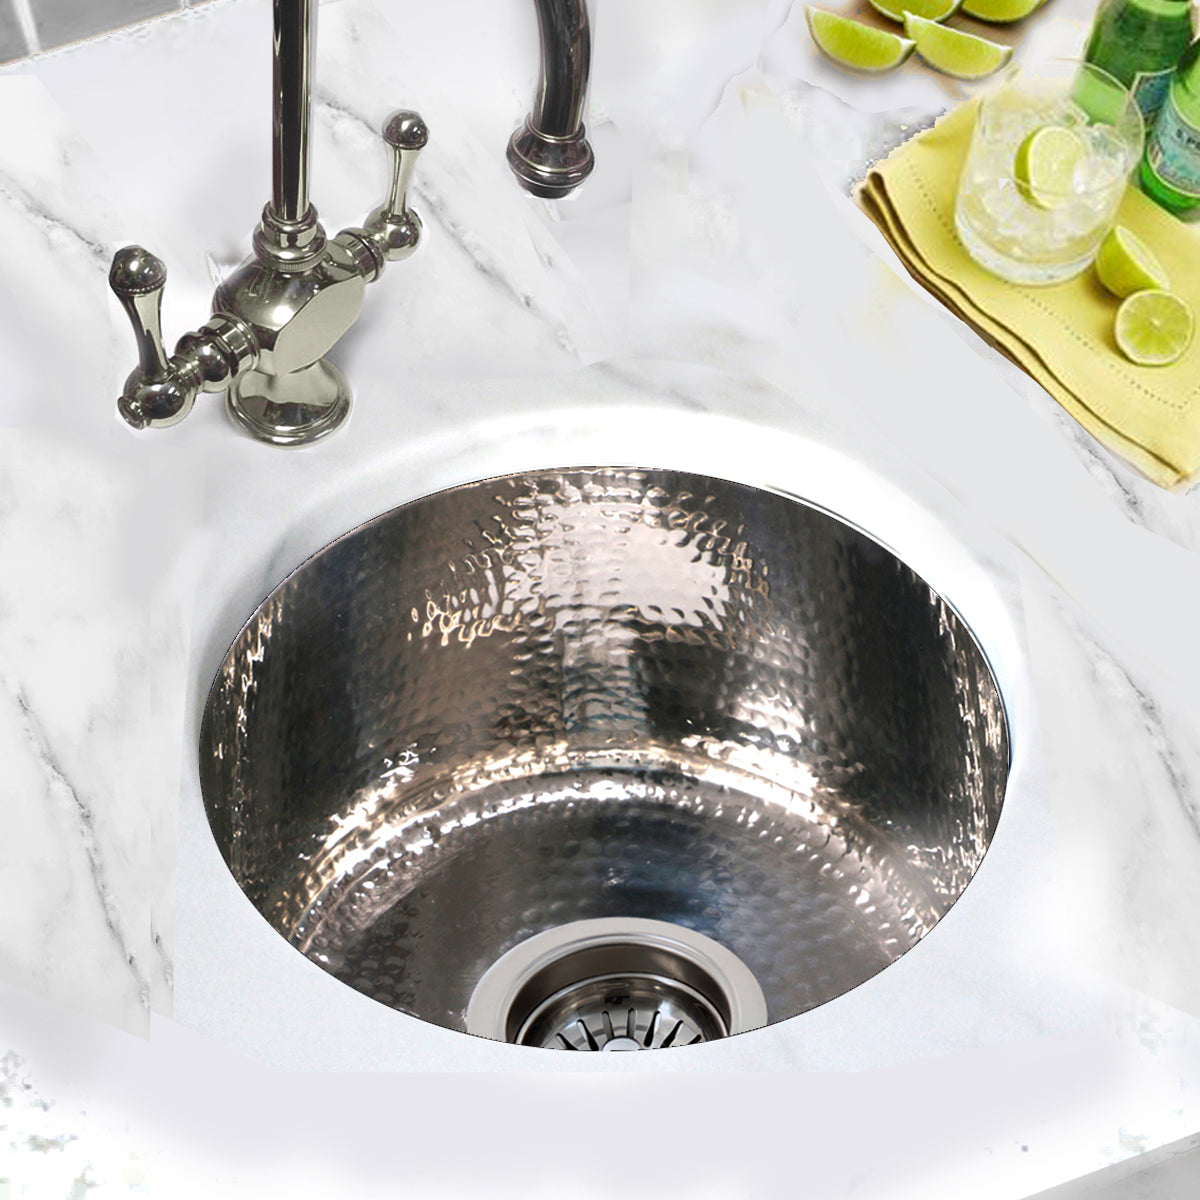 Nantucket Sinks Brightwork Home 15" Round Undermount or Overmount Polished Stainless Steel Single Bowl Hammered Bar Sink